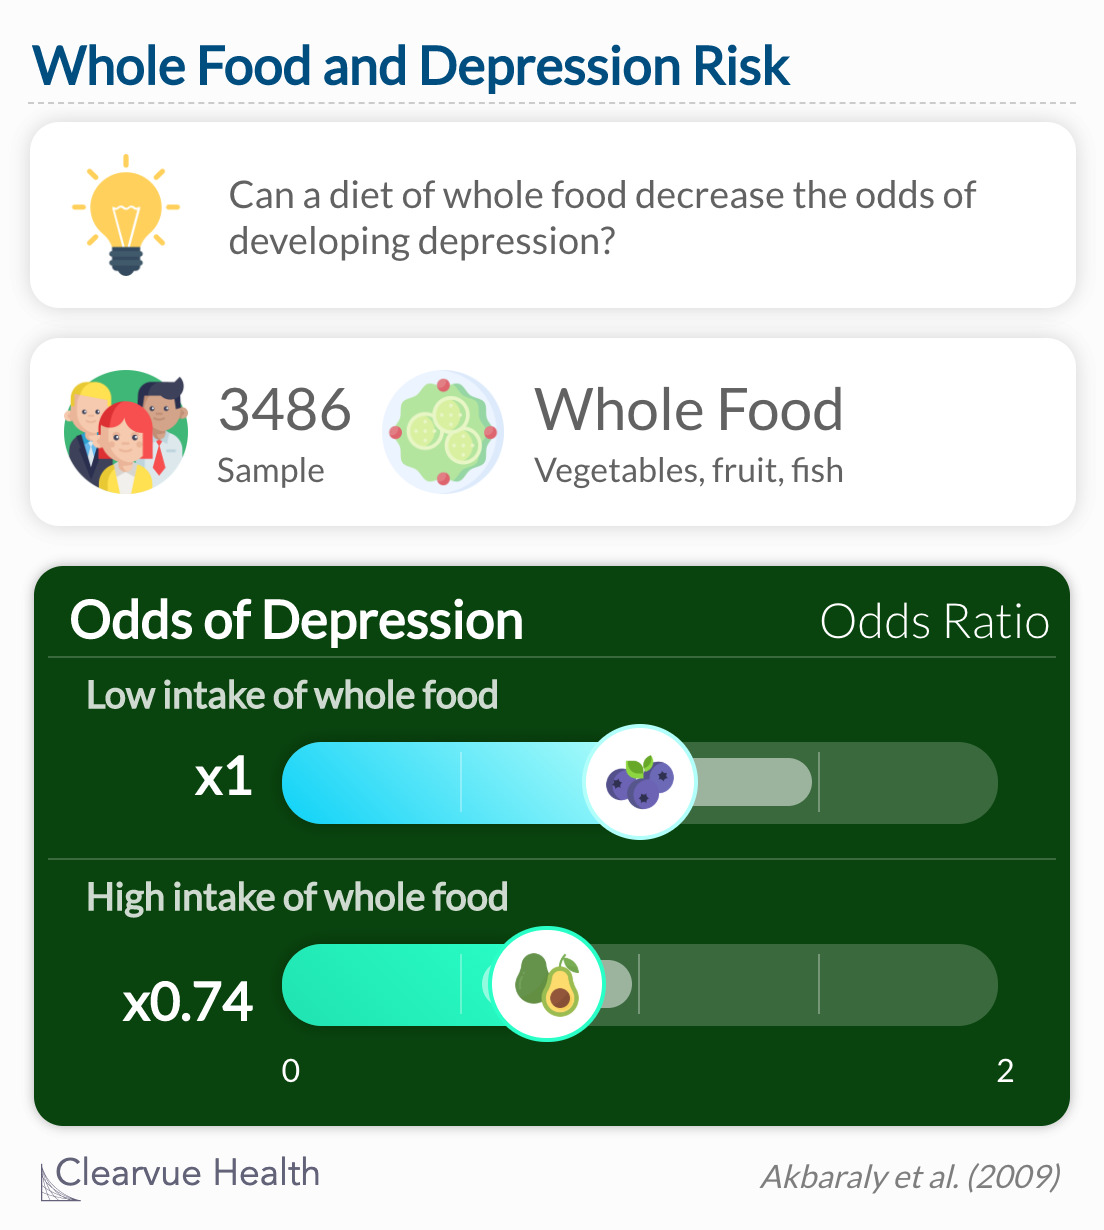 Participants who ate the most whole food had the lowest odds of depression